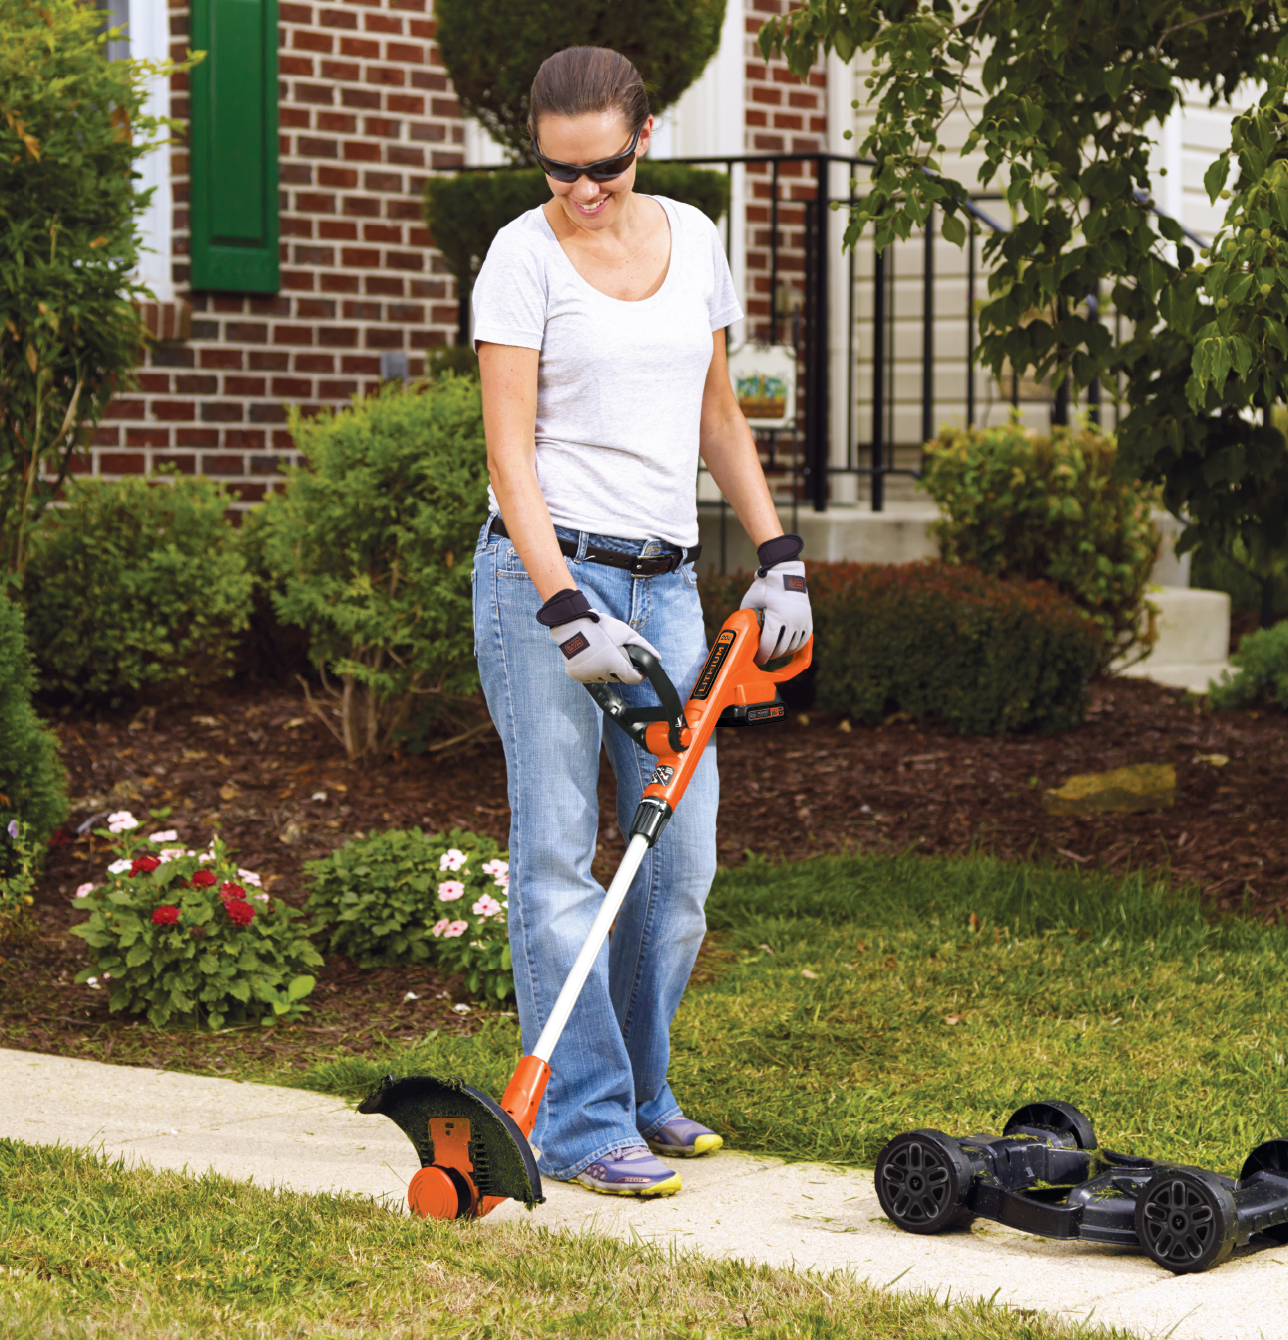 20V Max* Lithium 12 Inch 3-In-1 Compact Lawn Mower